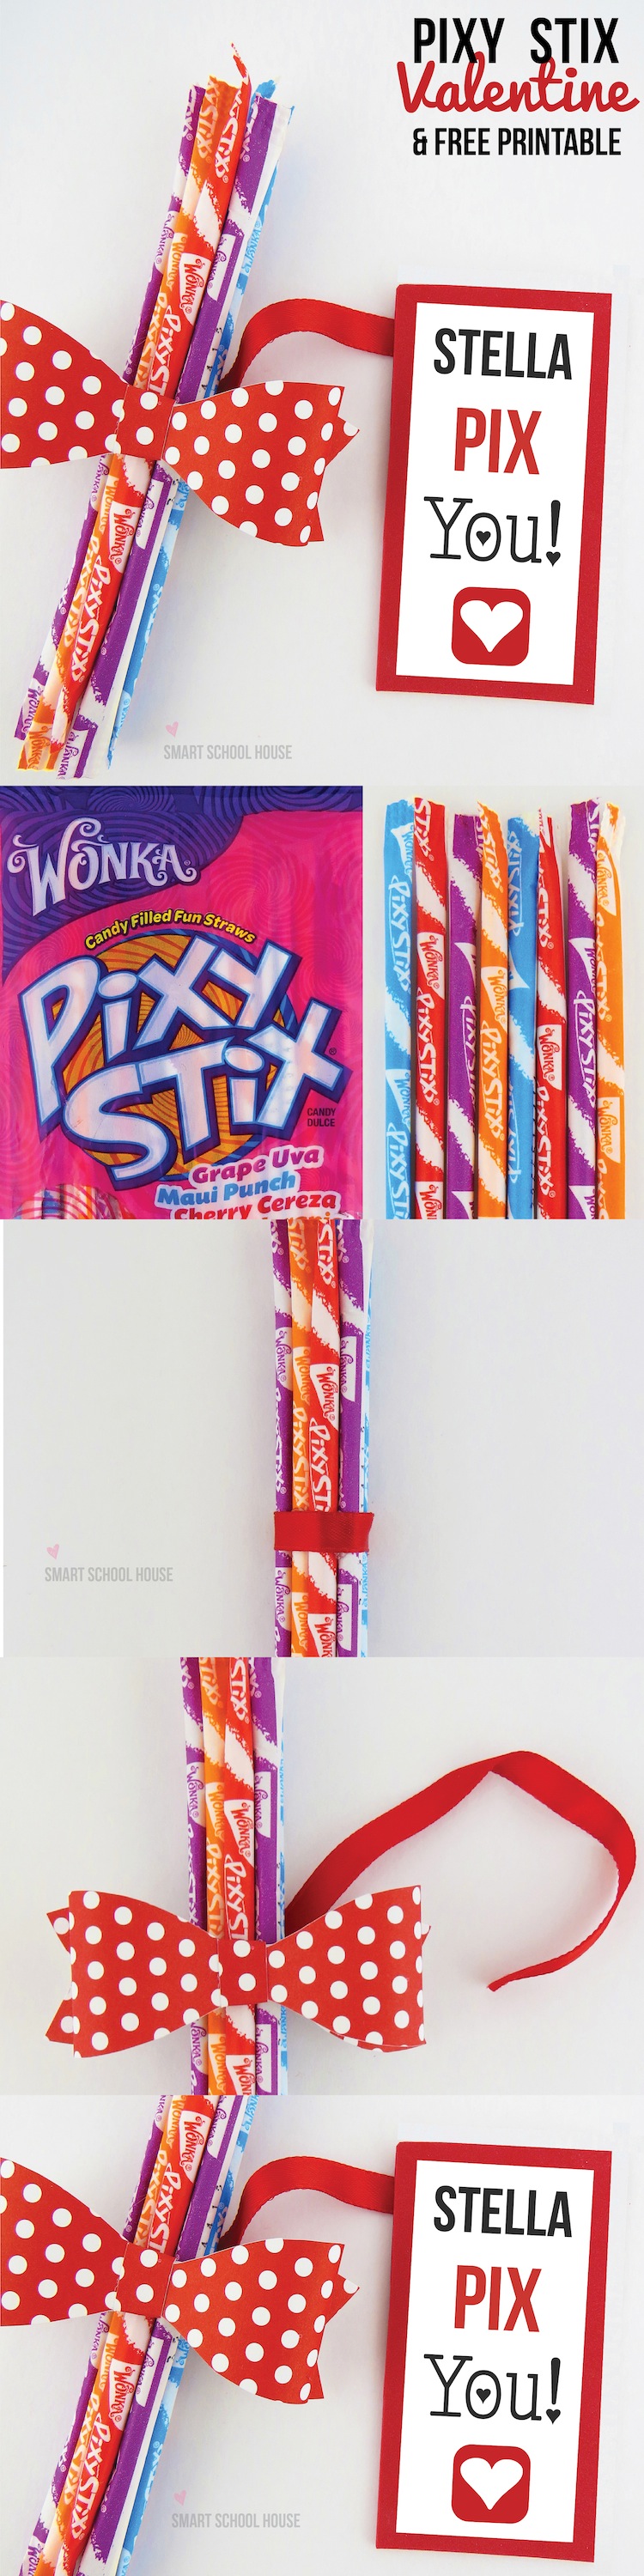 How to make a Pixy Stix Valentine with a free printable 